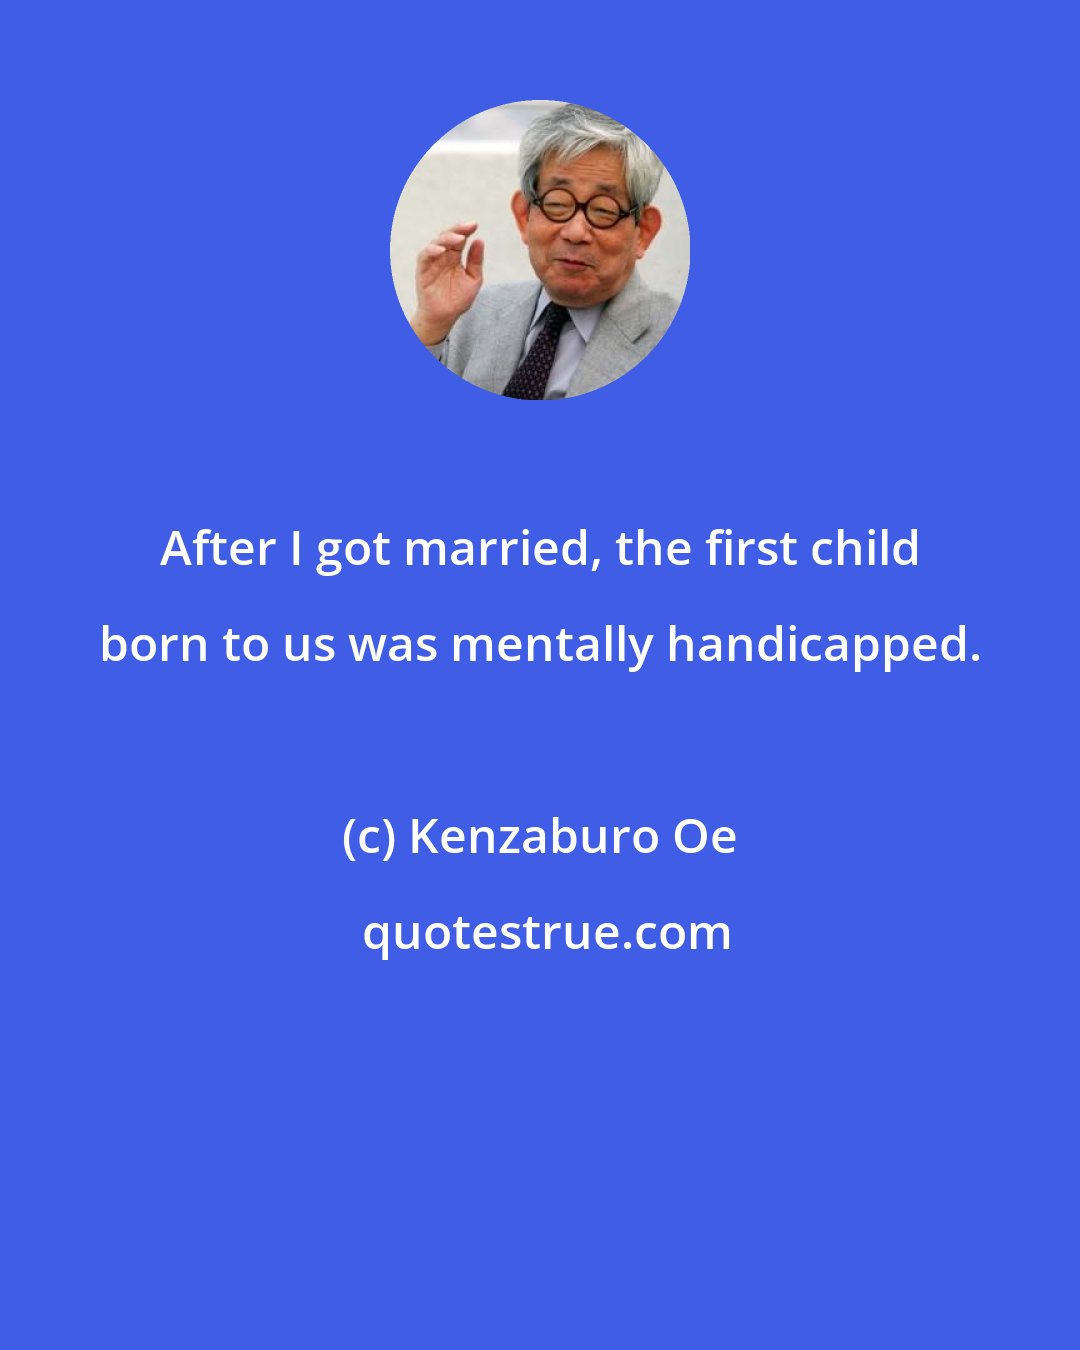 Kenzaburo Oe: After I got married, the first child born to us was mentally handicapped.